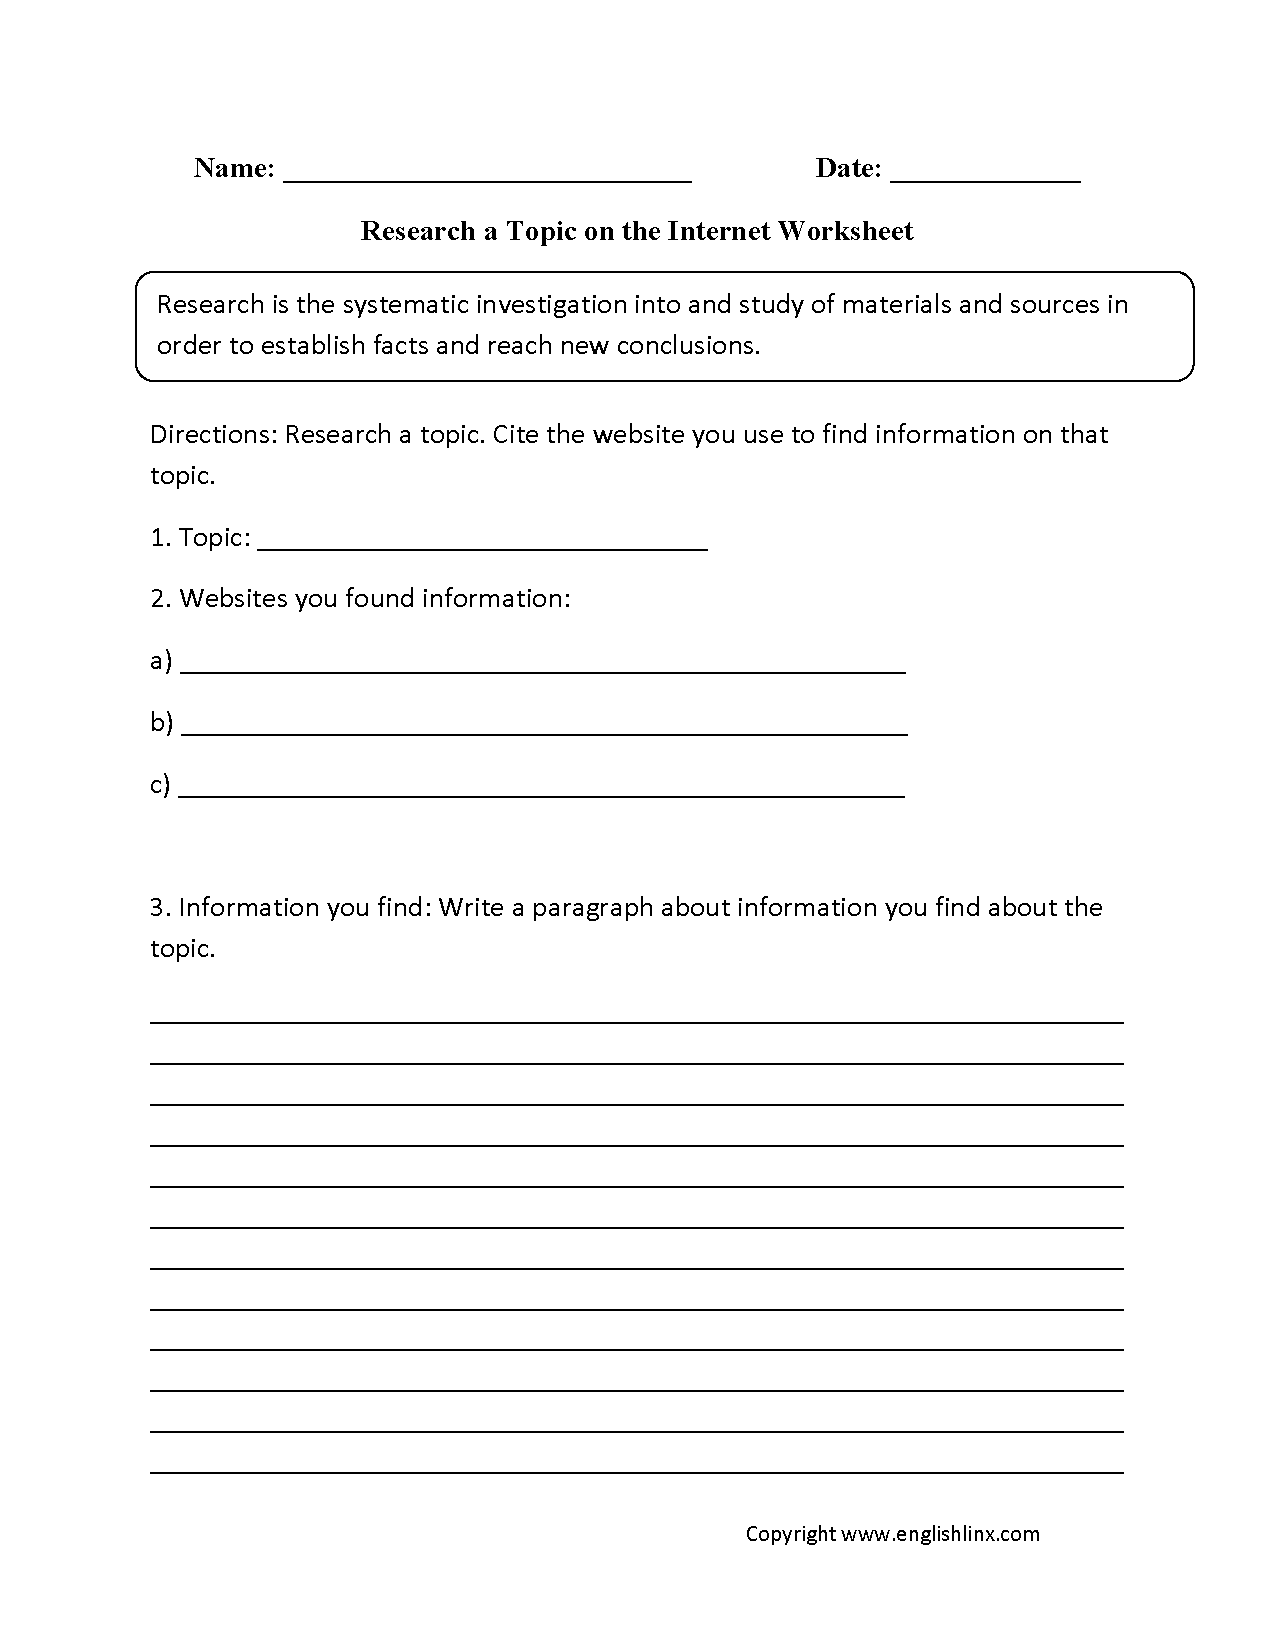 Research Worksheets | Research a Topic on the Internet Worksheet